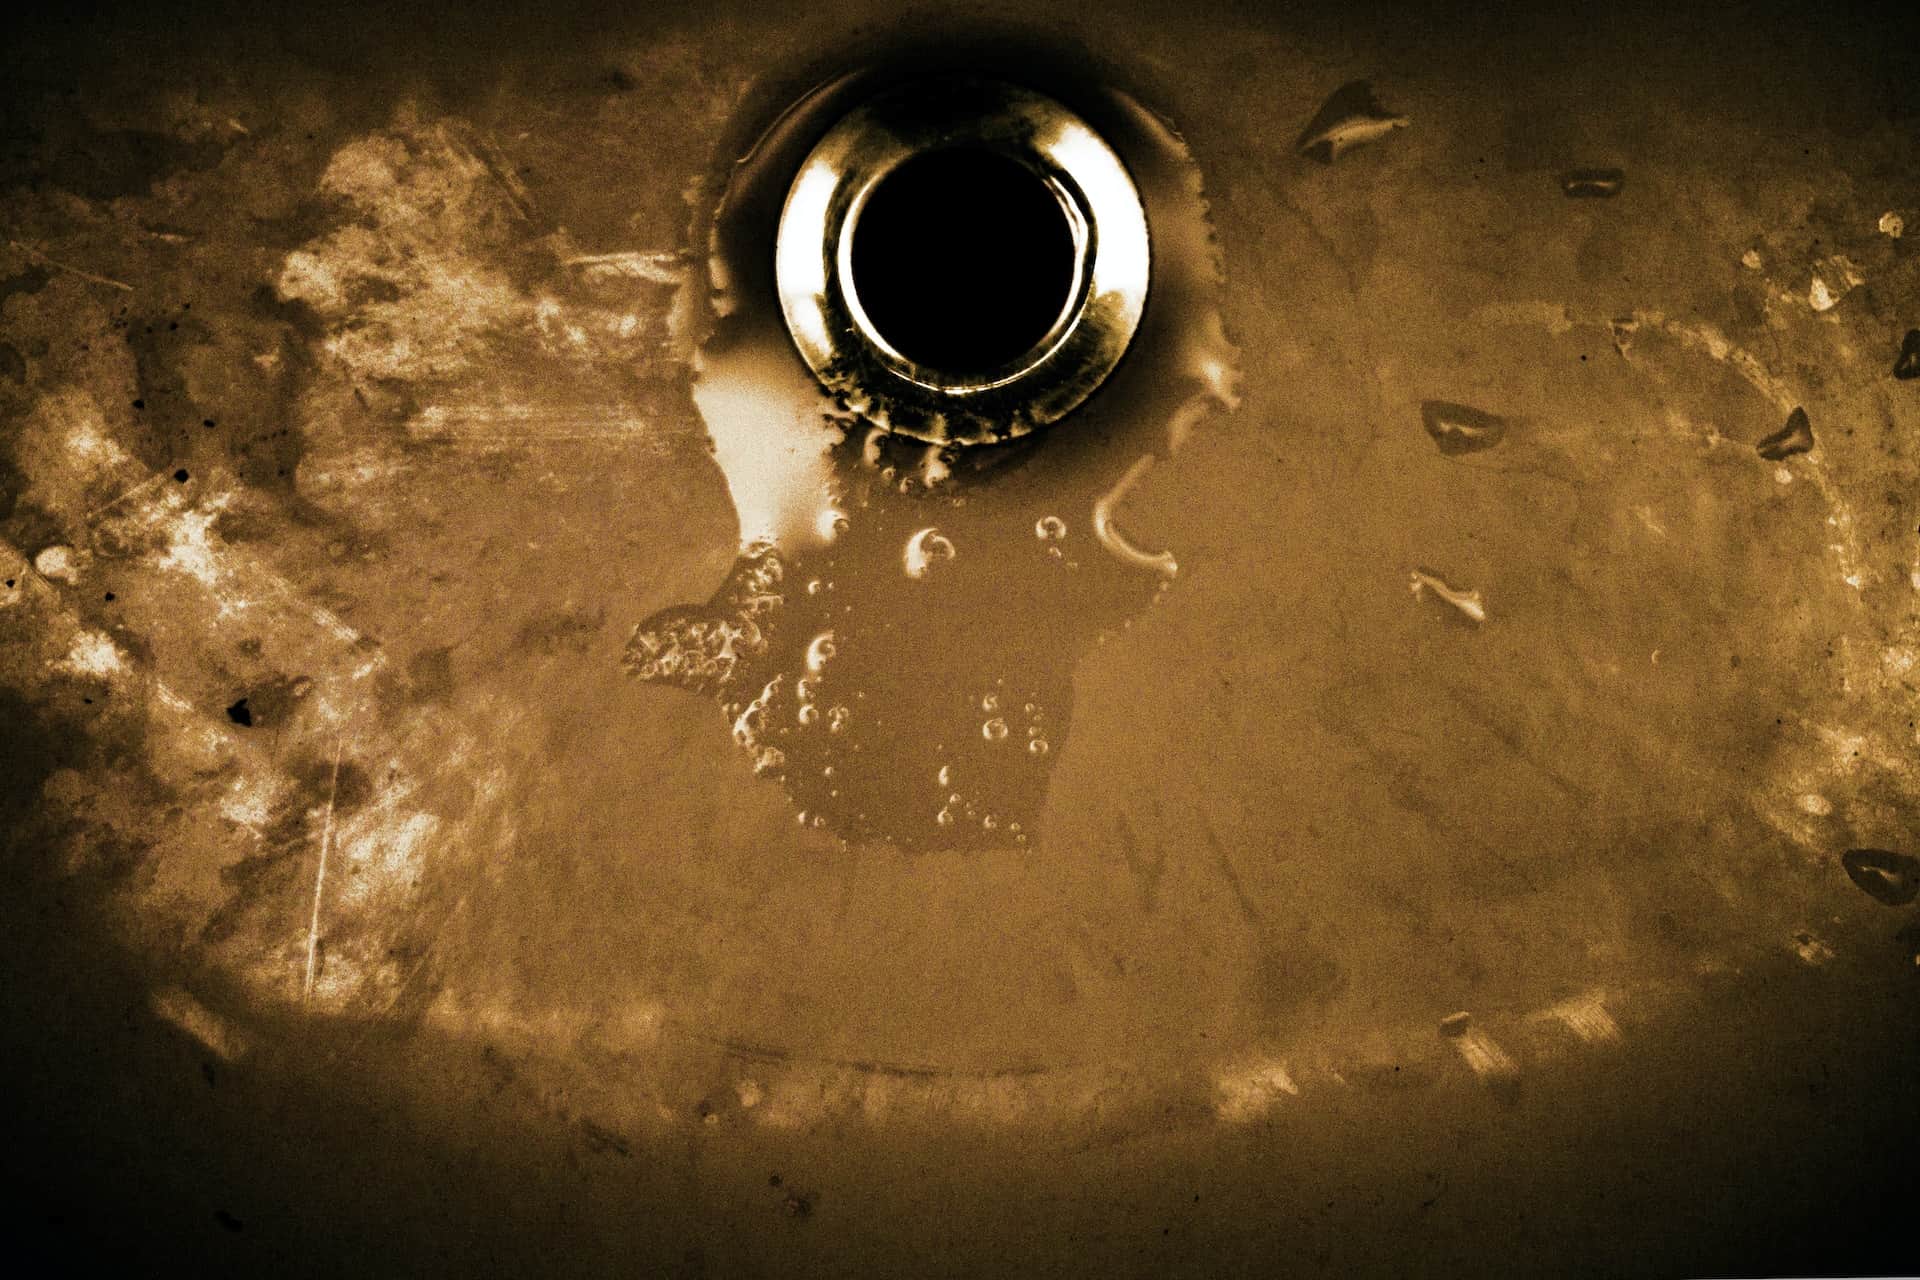 A plughole or drain surrounding by water.